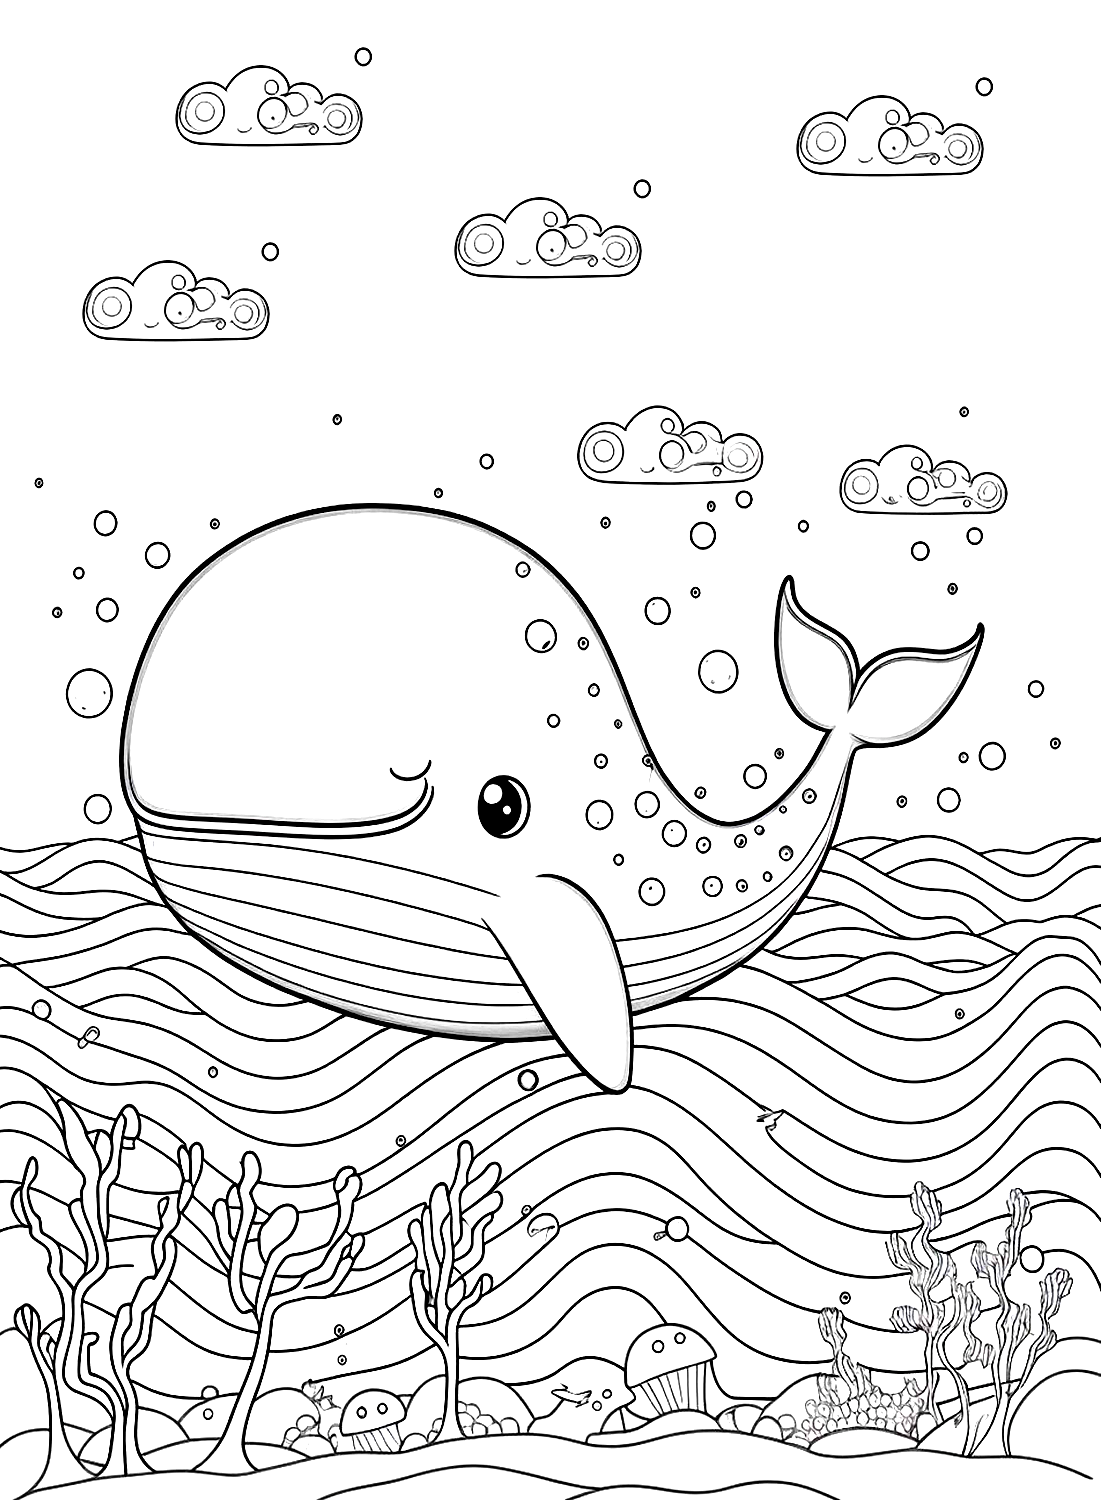 Whale coloring sheets